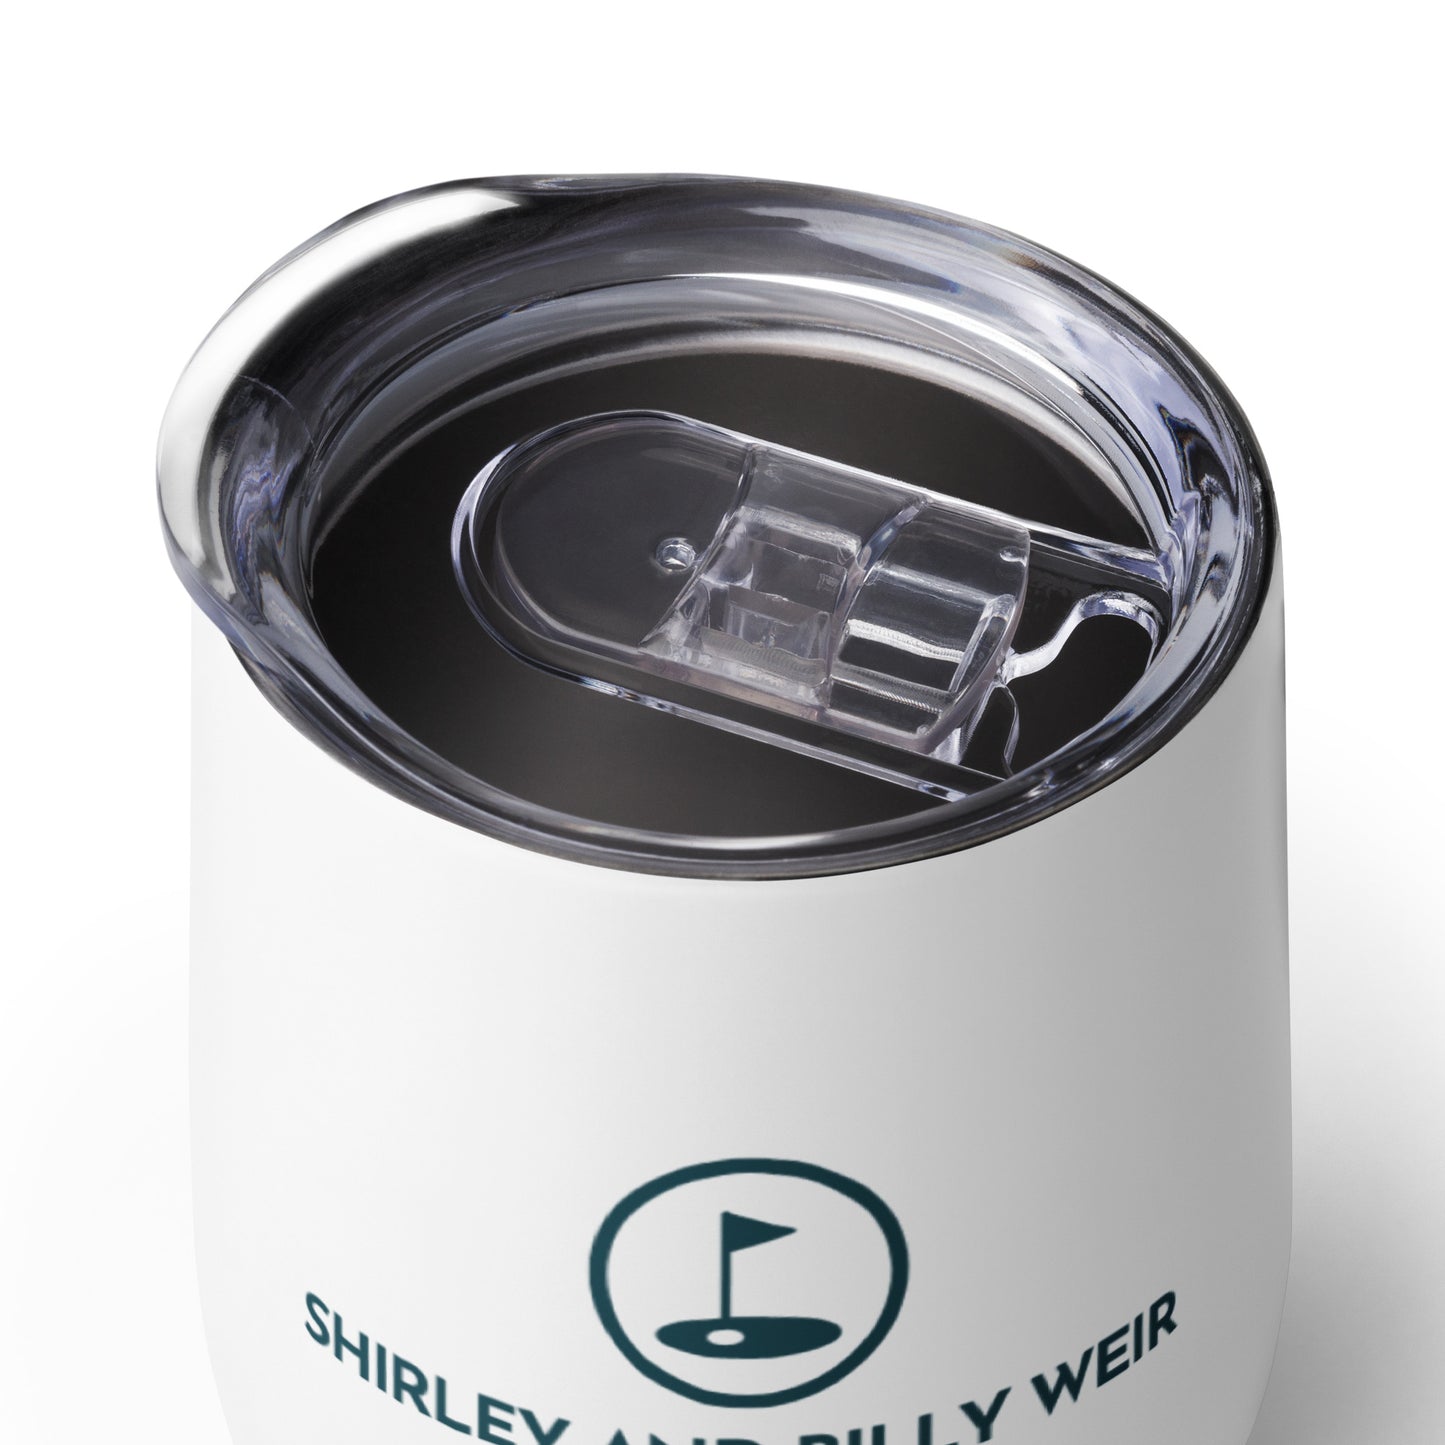 Shirley and Billy Weir Foundation Wine Tumbler